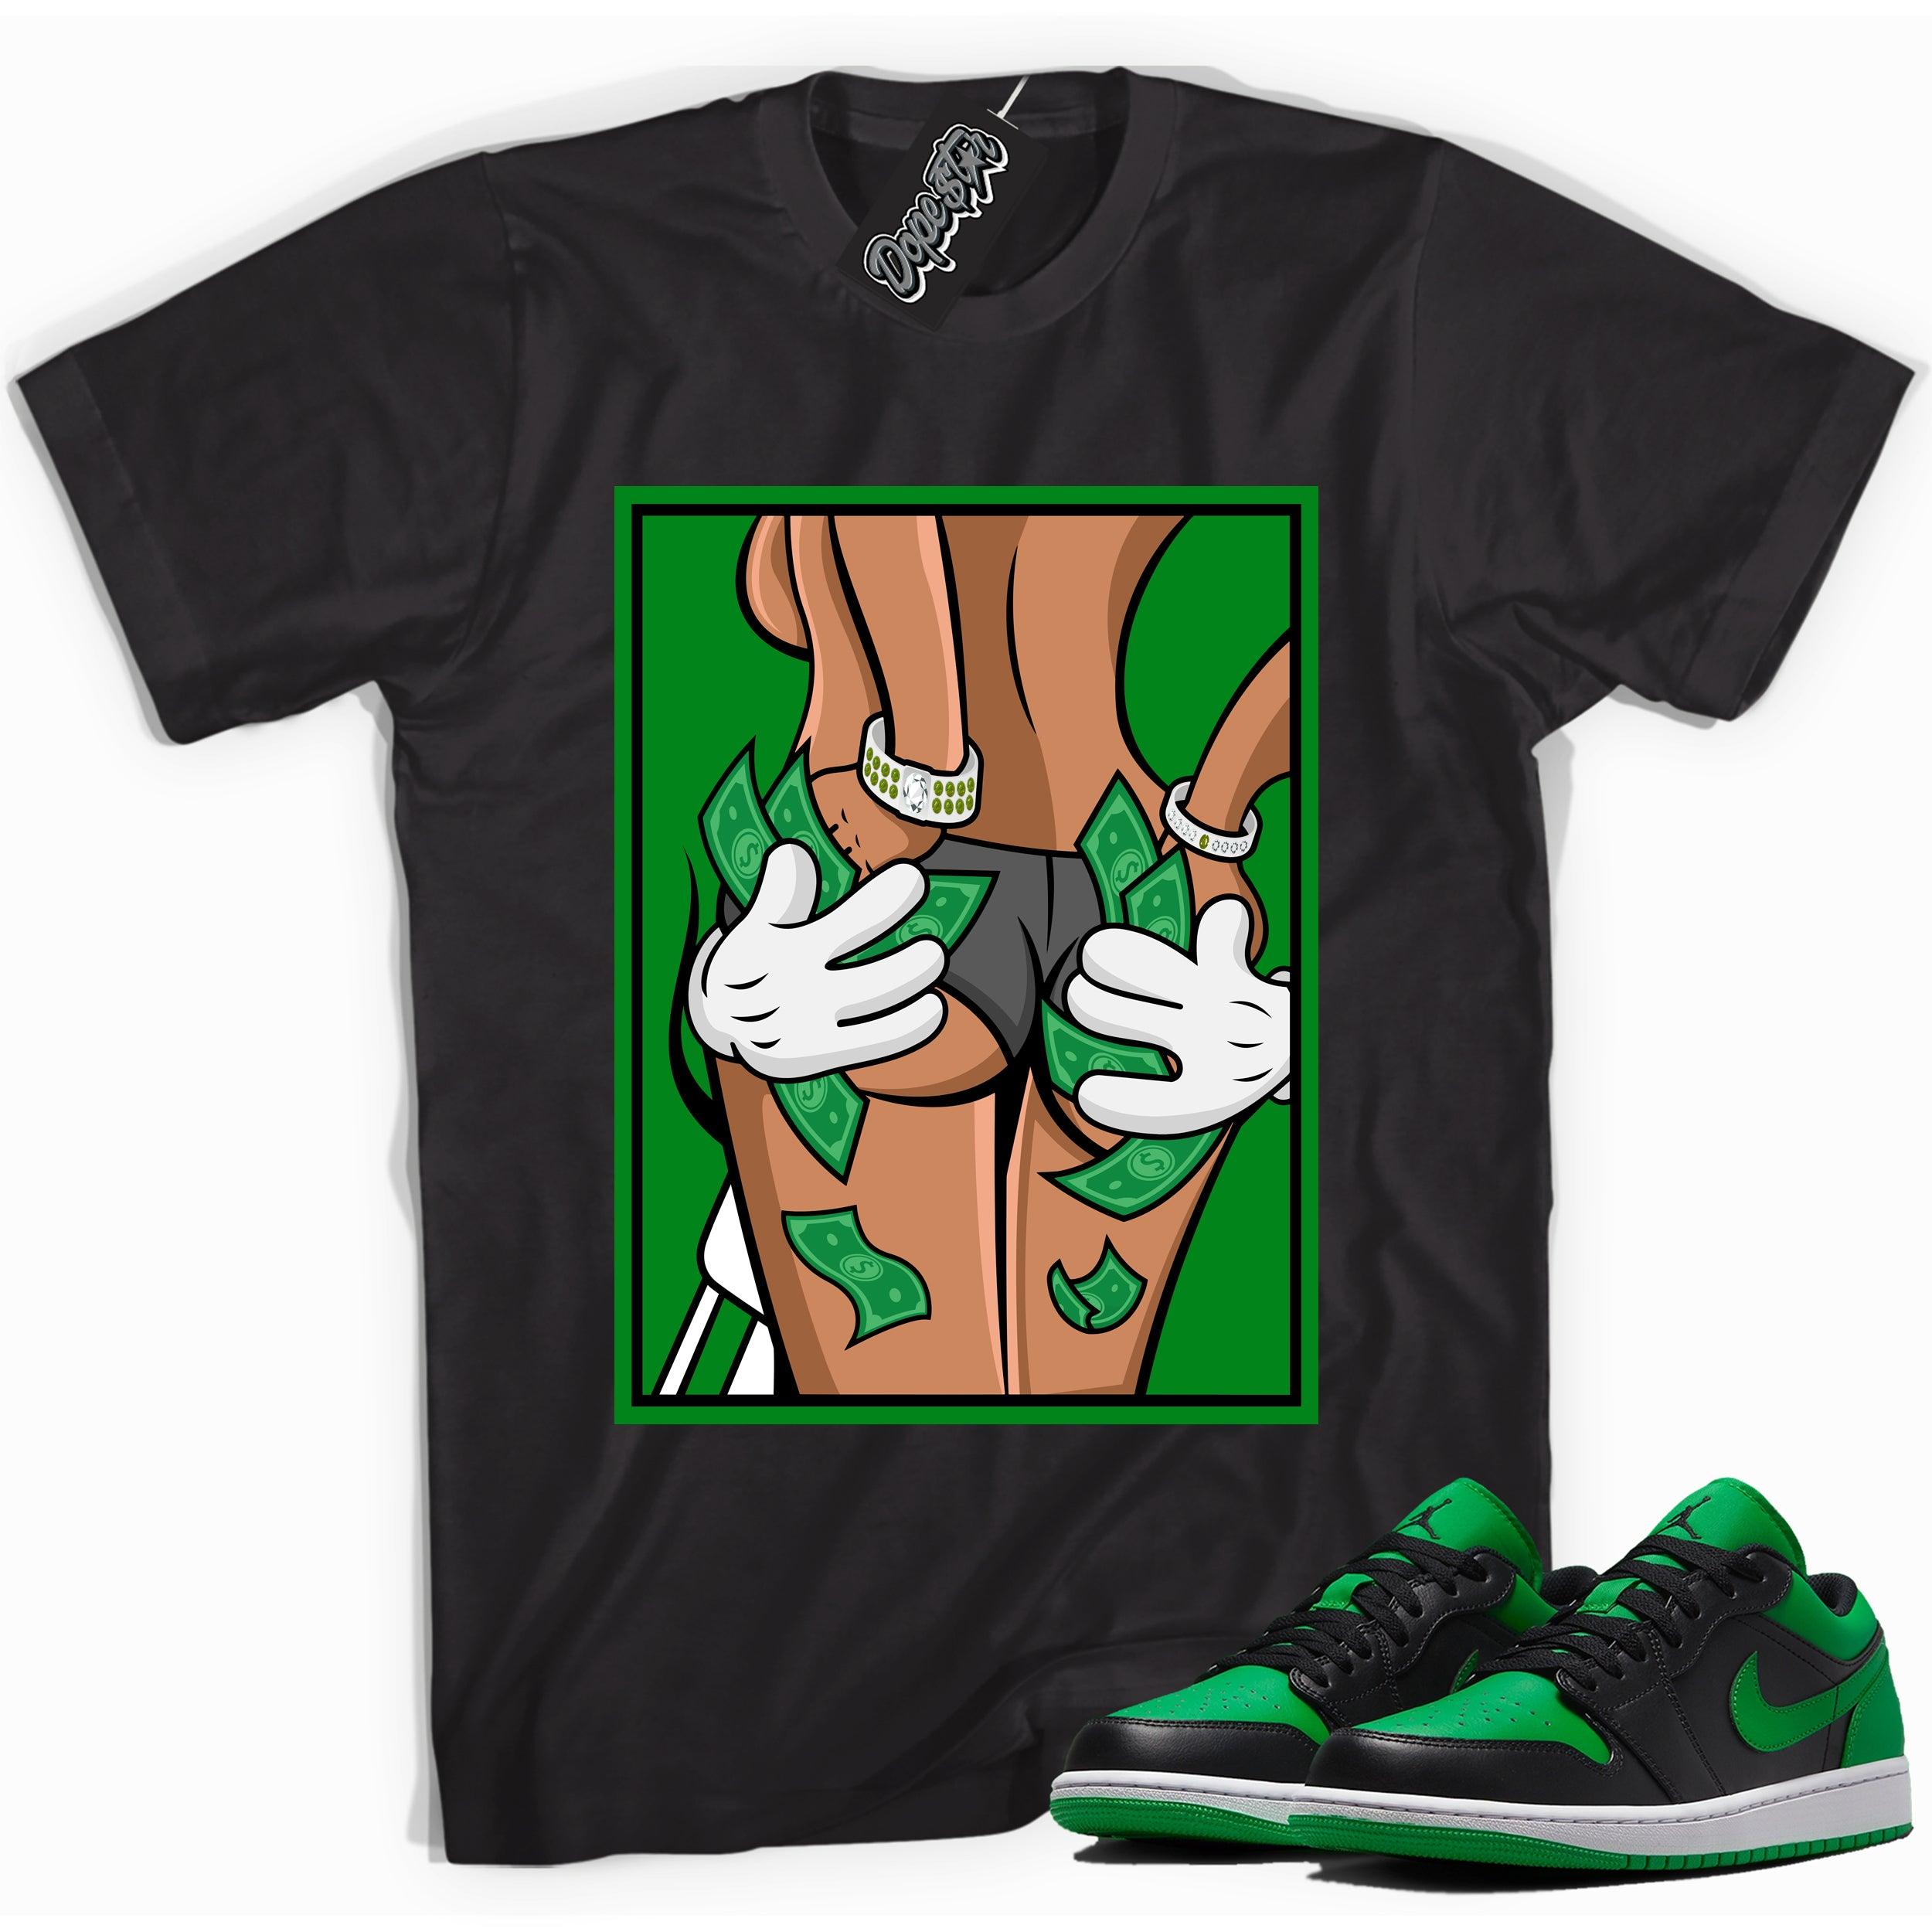 Cool black graphic tee with 'hands full' print, that perfectly matches Air Jordan 1 Low Lucky Green sneakers